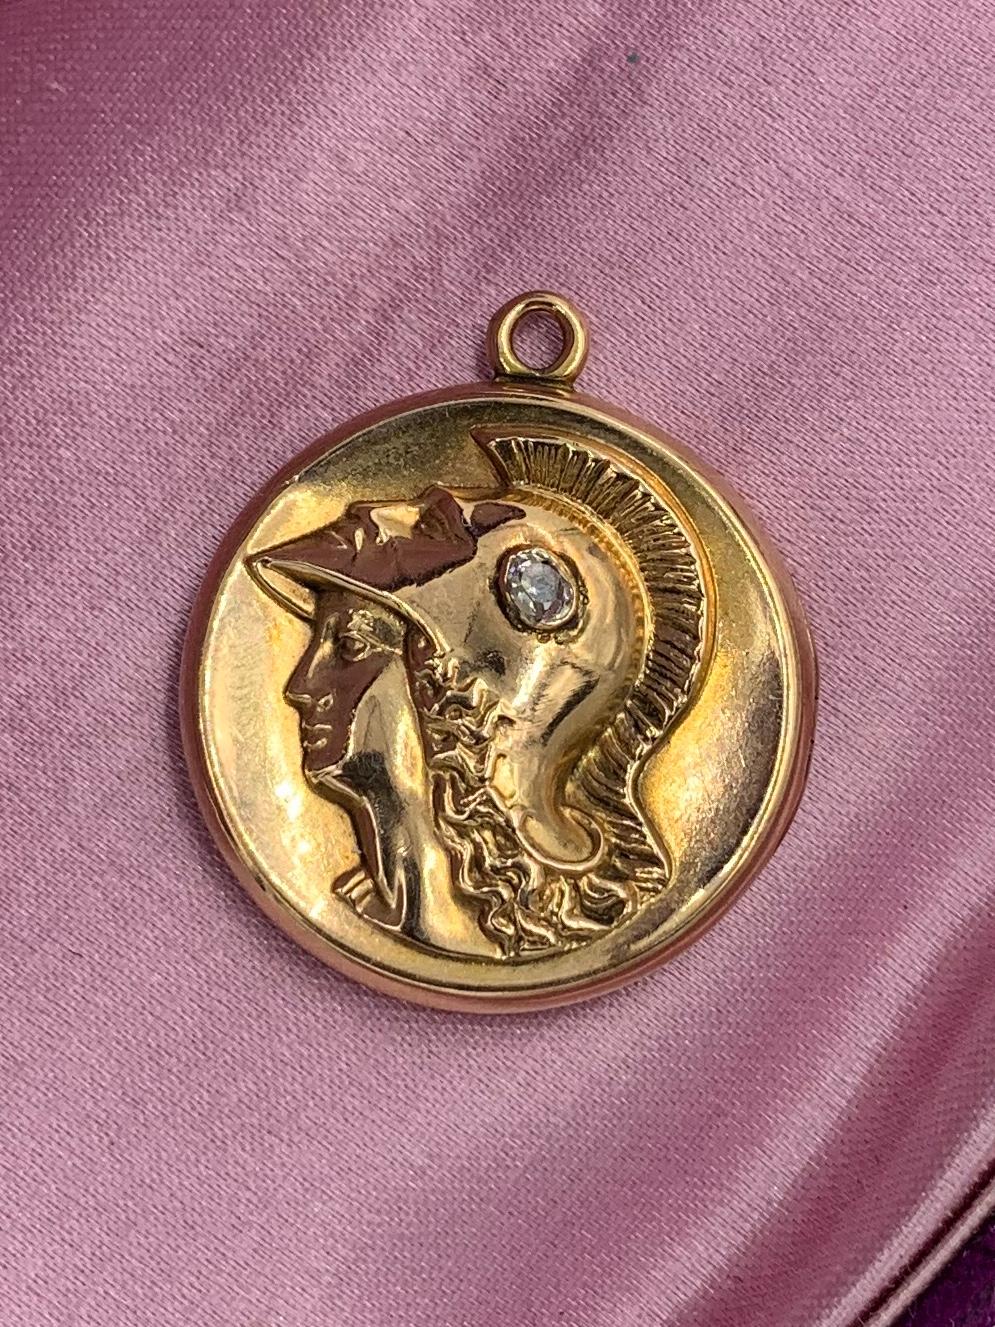 This is a gorgeous Victorian - Belle Epoque Picture locket pendant with a stunning Roman Neoclassical Warrior set with a .15 Carat Old Mine Cut Diamond.  The locket is the most stunning 14 Karat Gold.  The wonderful image of the Warrior is